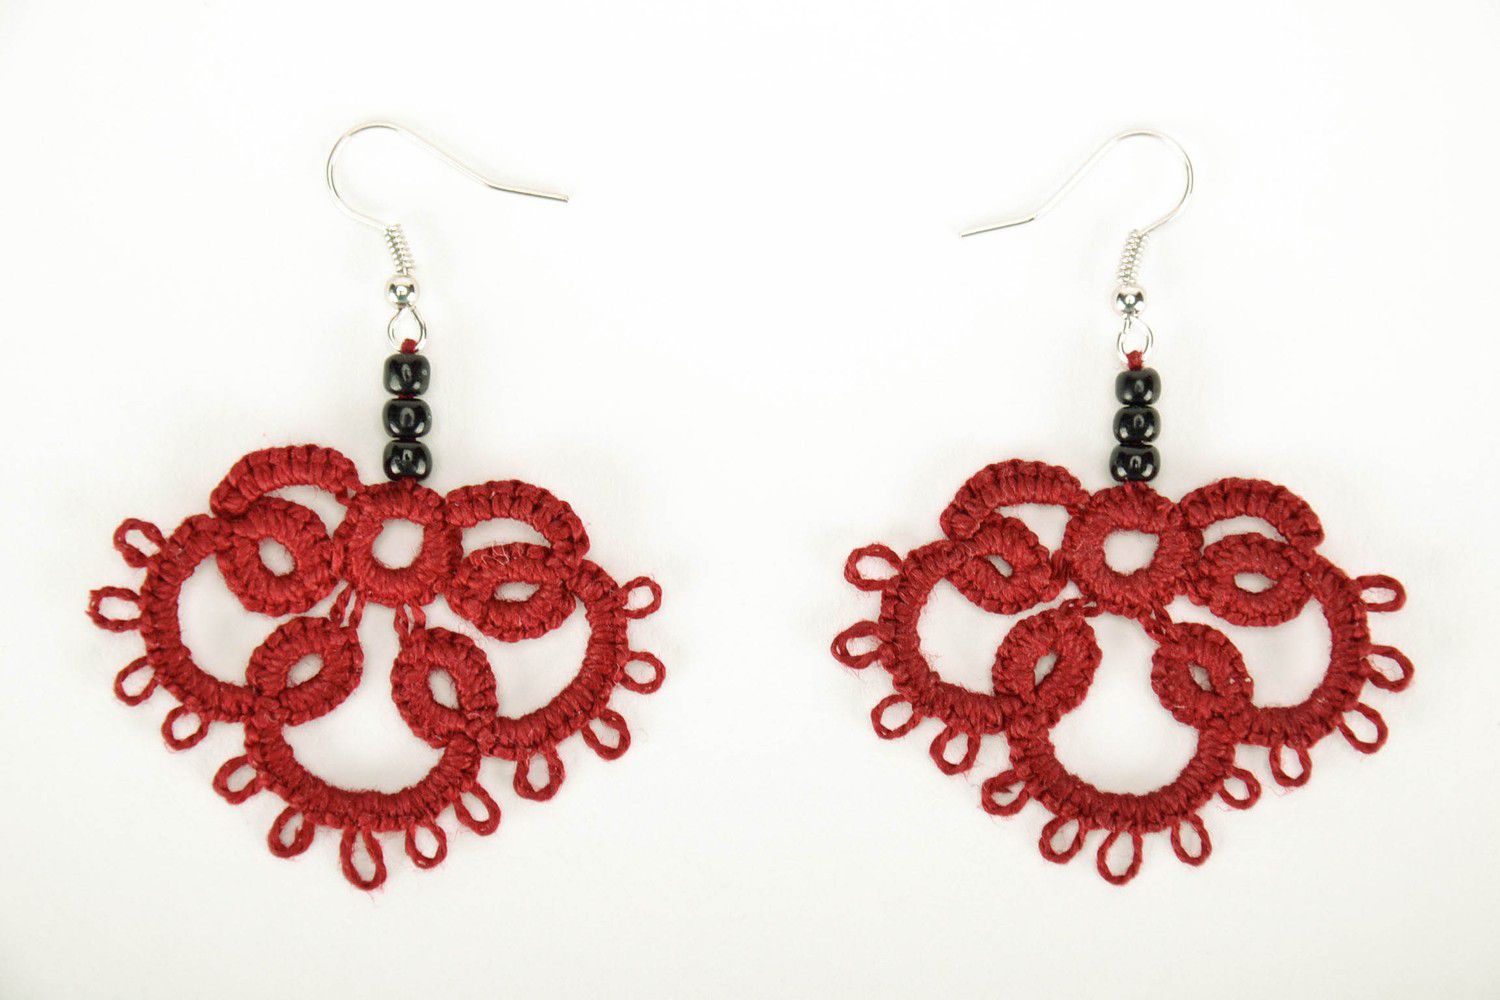 Earrings made from woven lace Claret Clover photo 3